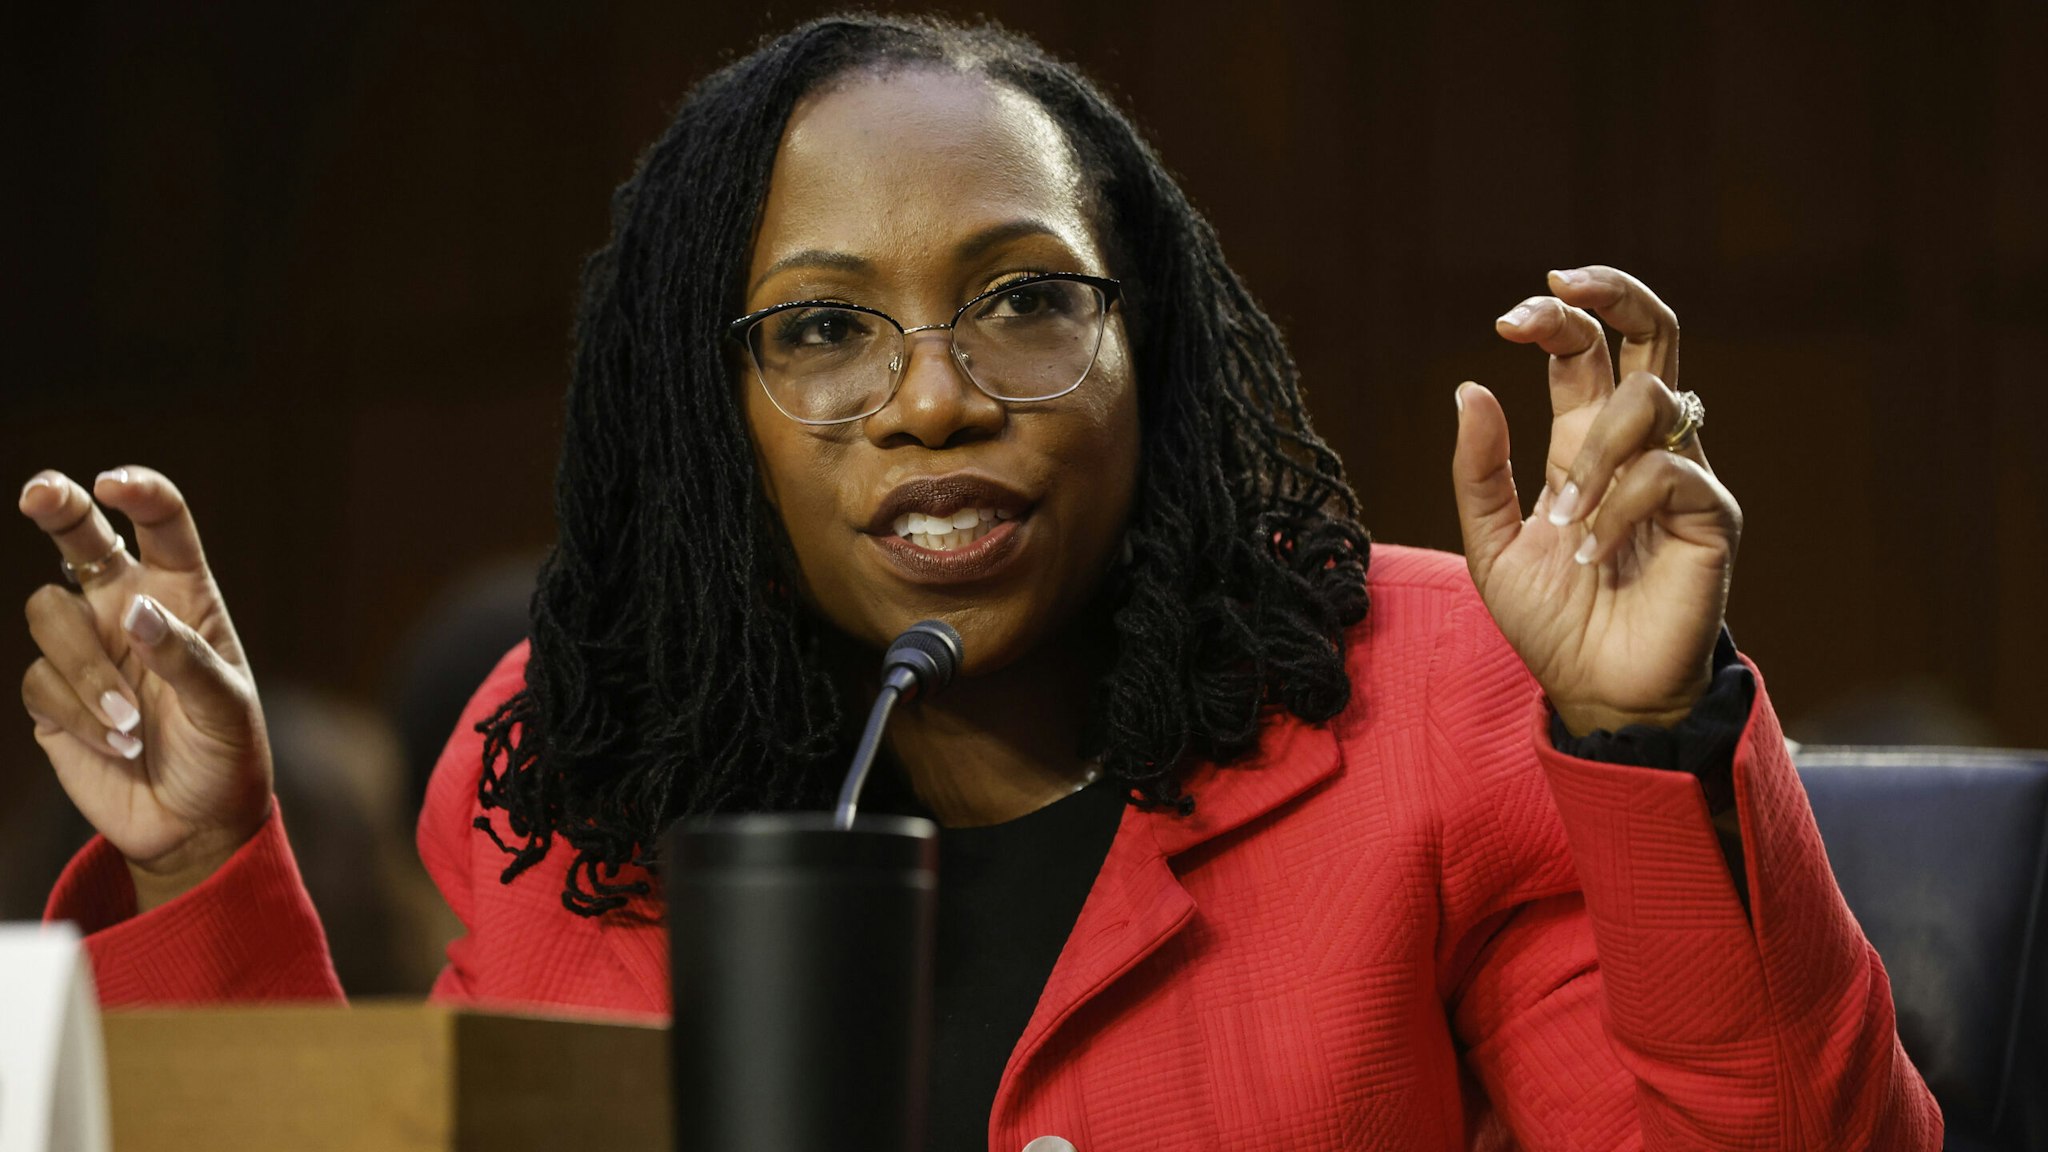 WASHINGTON, DC - MARCH 22: U.S. Supreme Court nominee Judge Ketanji Brown Jackson testifies during her confirmation hearing before the Senate Judiciary Committee in the Hart Senate Office Building on Capitol Hill, March 22, 2022 in Washington, DC. Judge Ketanji Brown Jackson, President Joe Biden's pick to replace retiring Justice Stephen Breyer on the U.S. Supreme Court, would become the first Black woman to serve on the Supreme Court if confirmed.